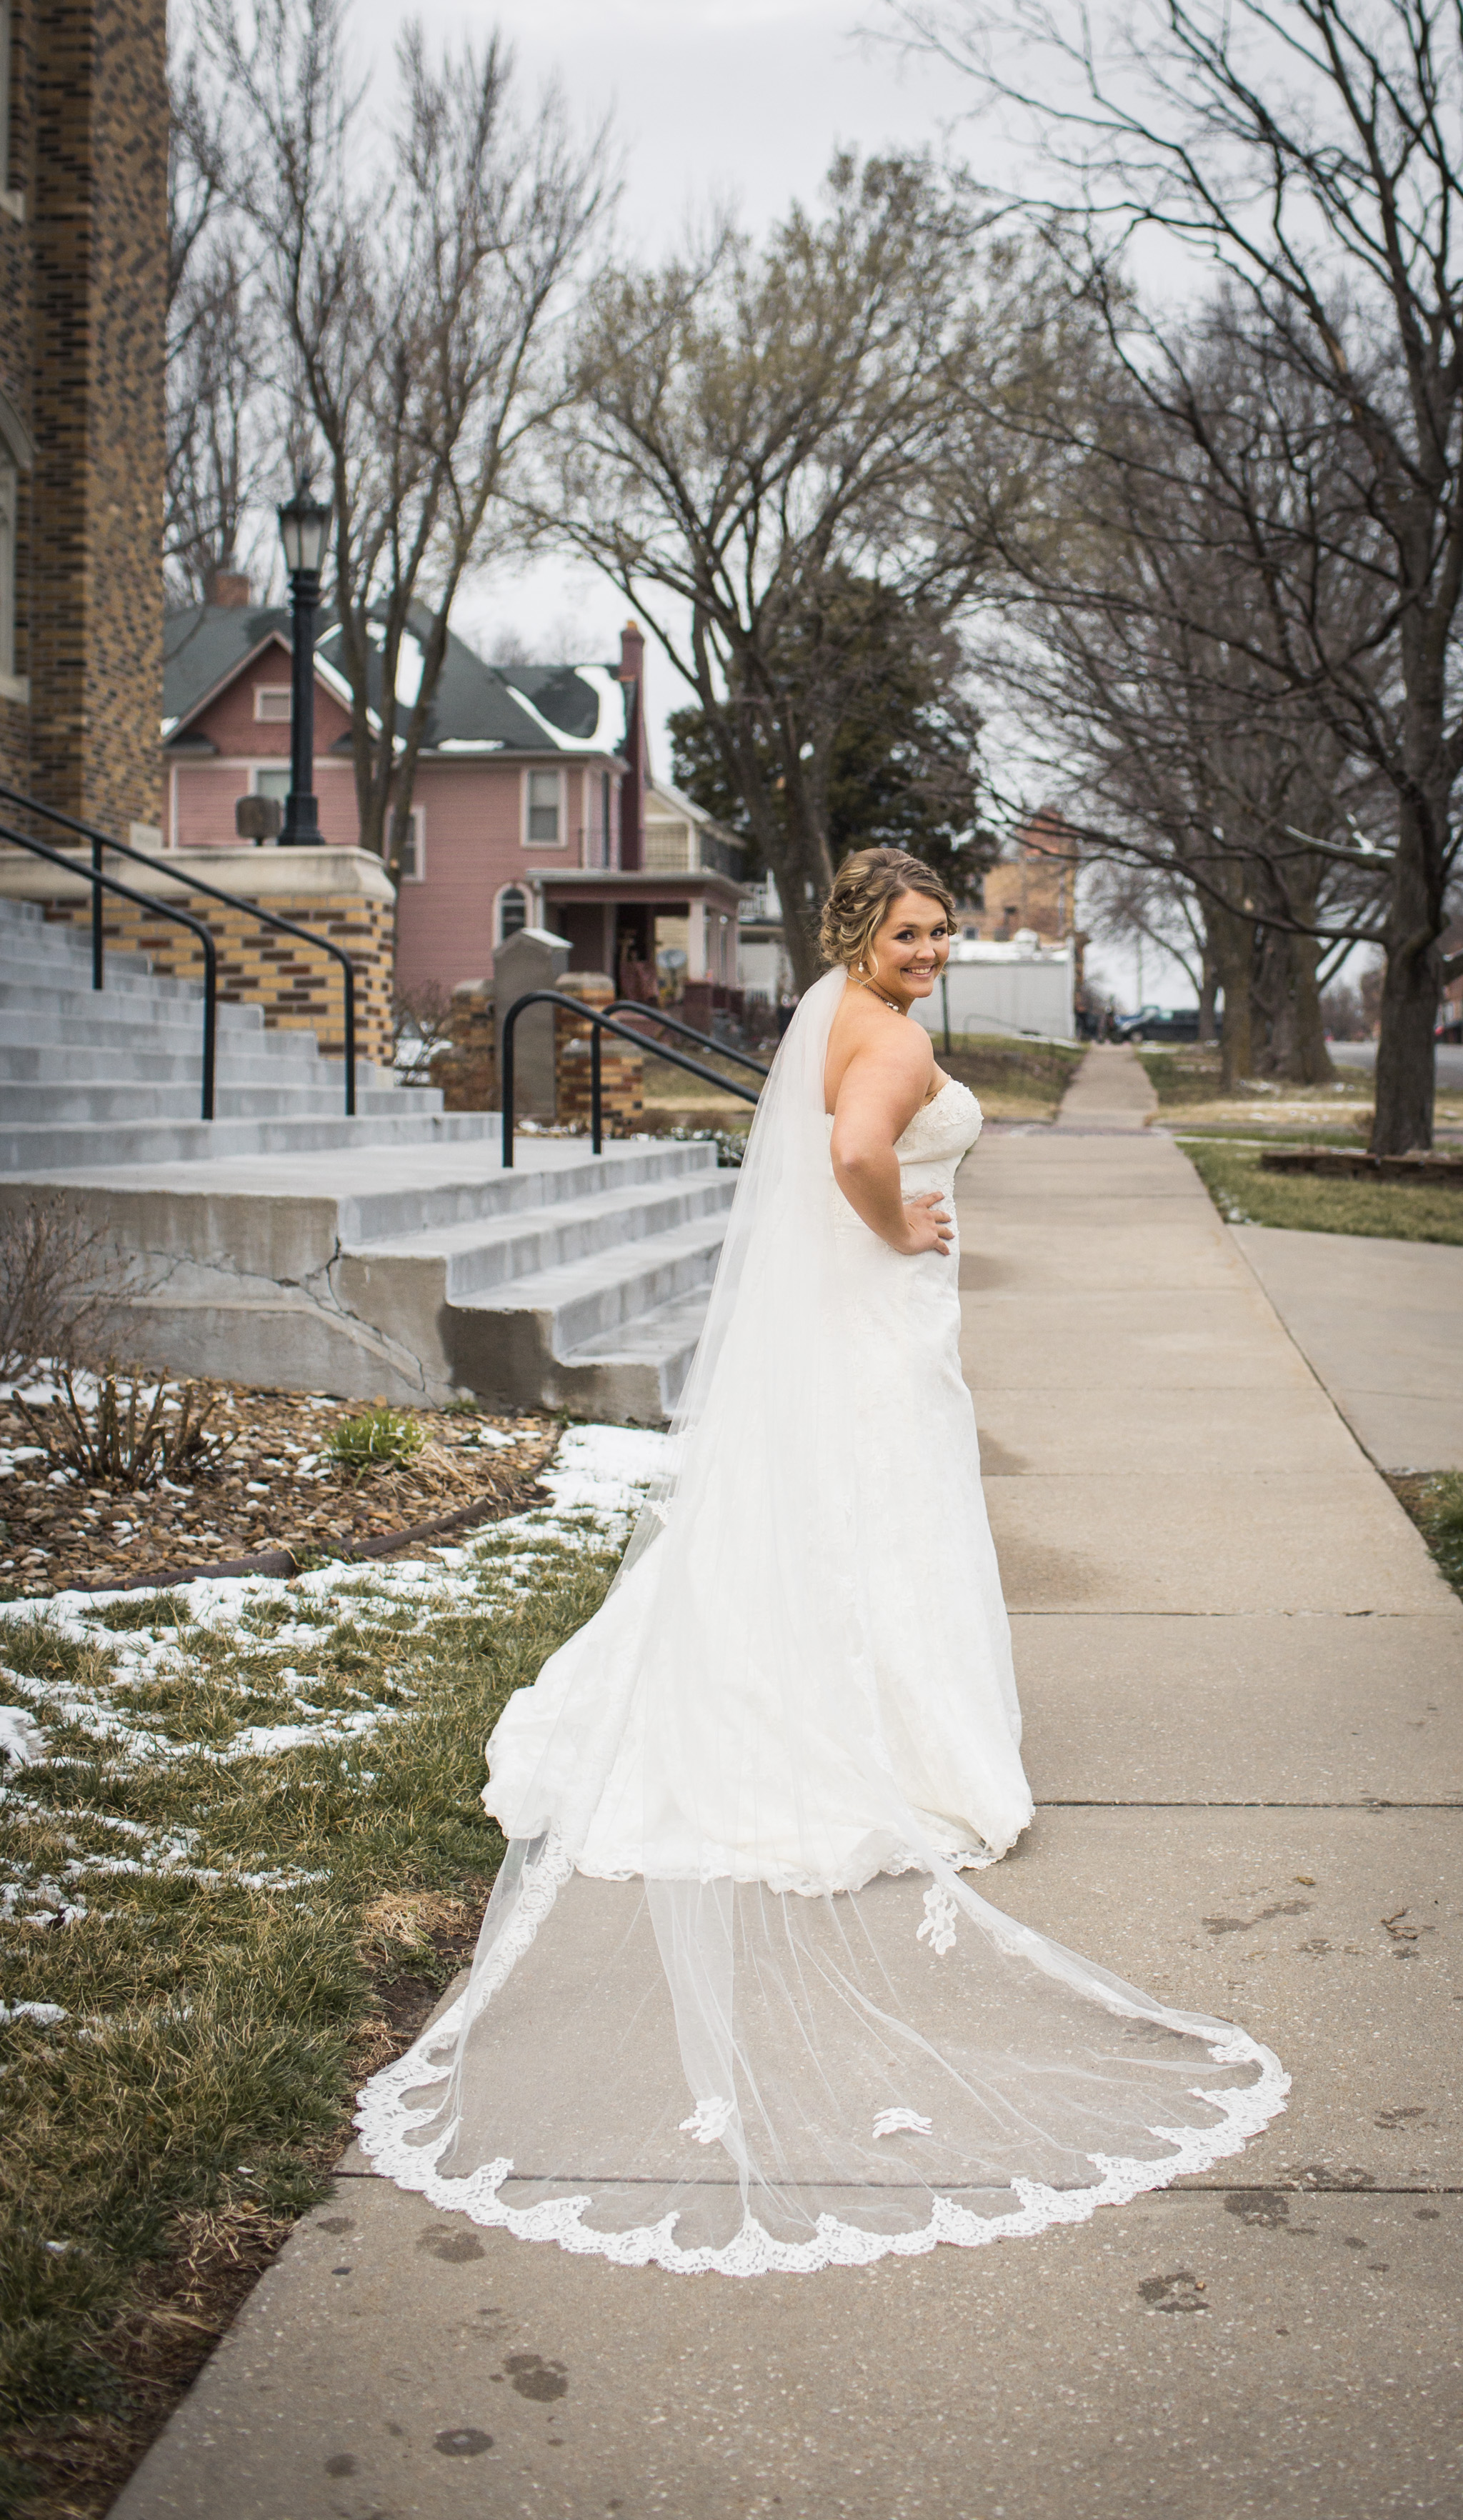 Zibell Spring Wedding, Bride and Groom, Powerful, Connected, Exploration, Laura Duggleby Photography -116.JPG